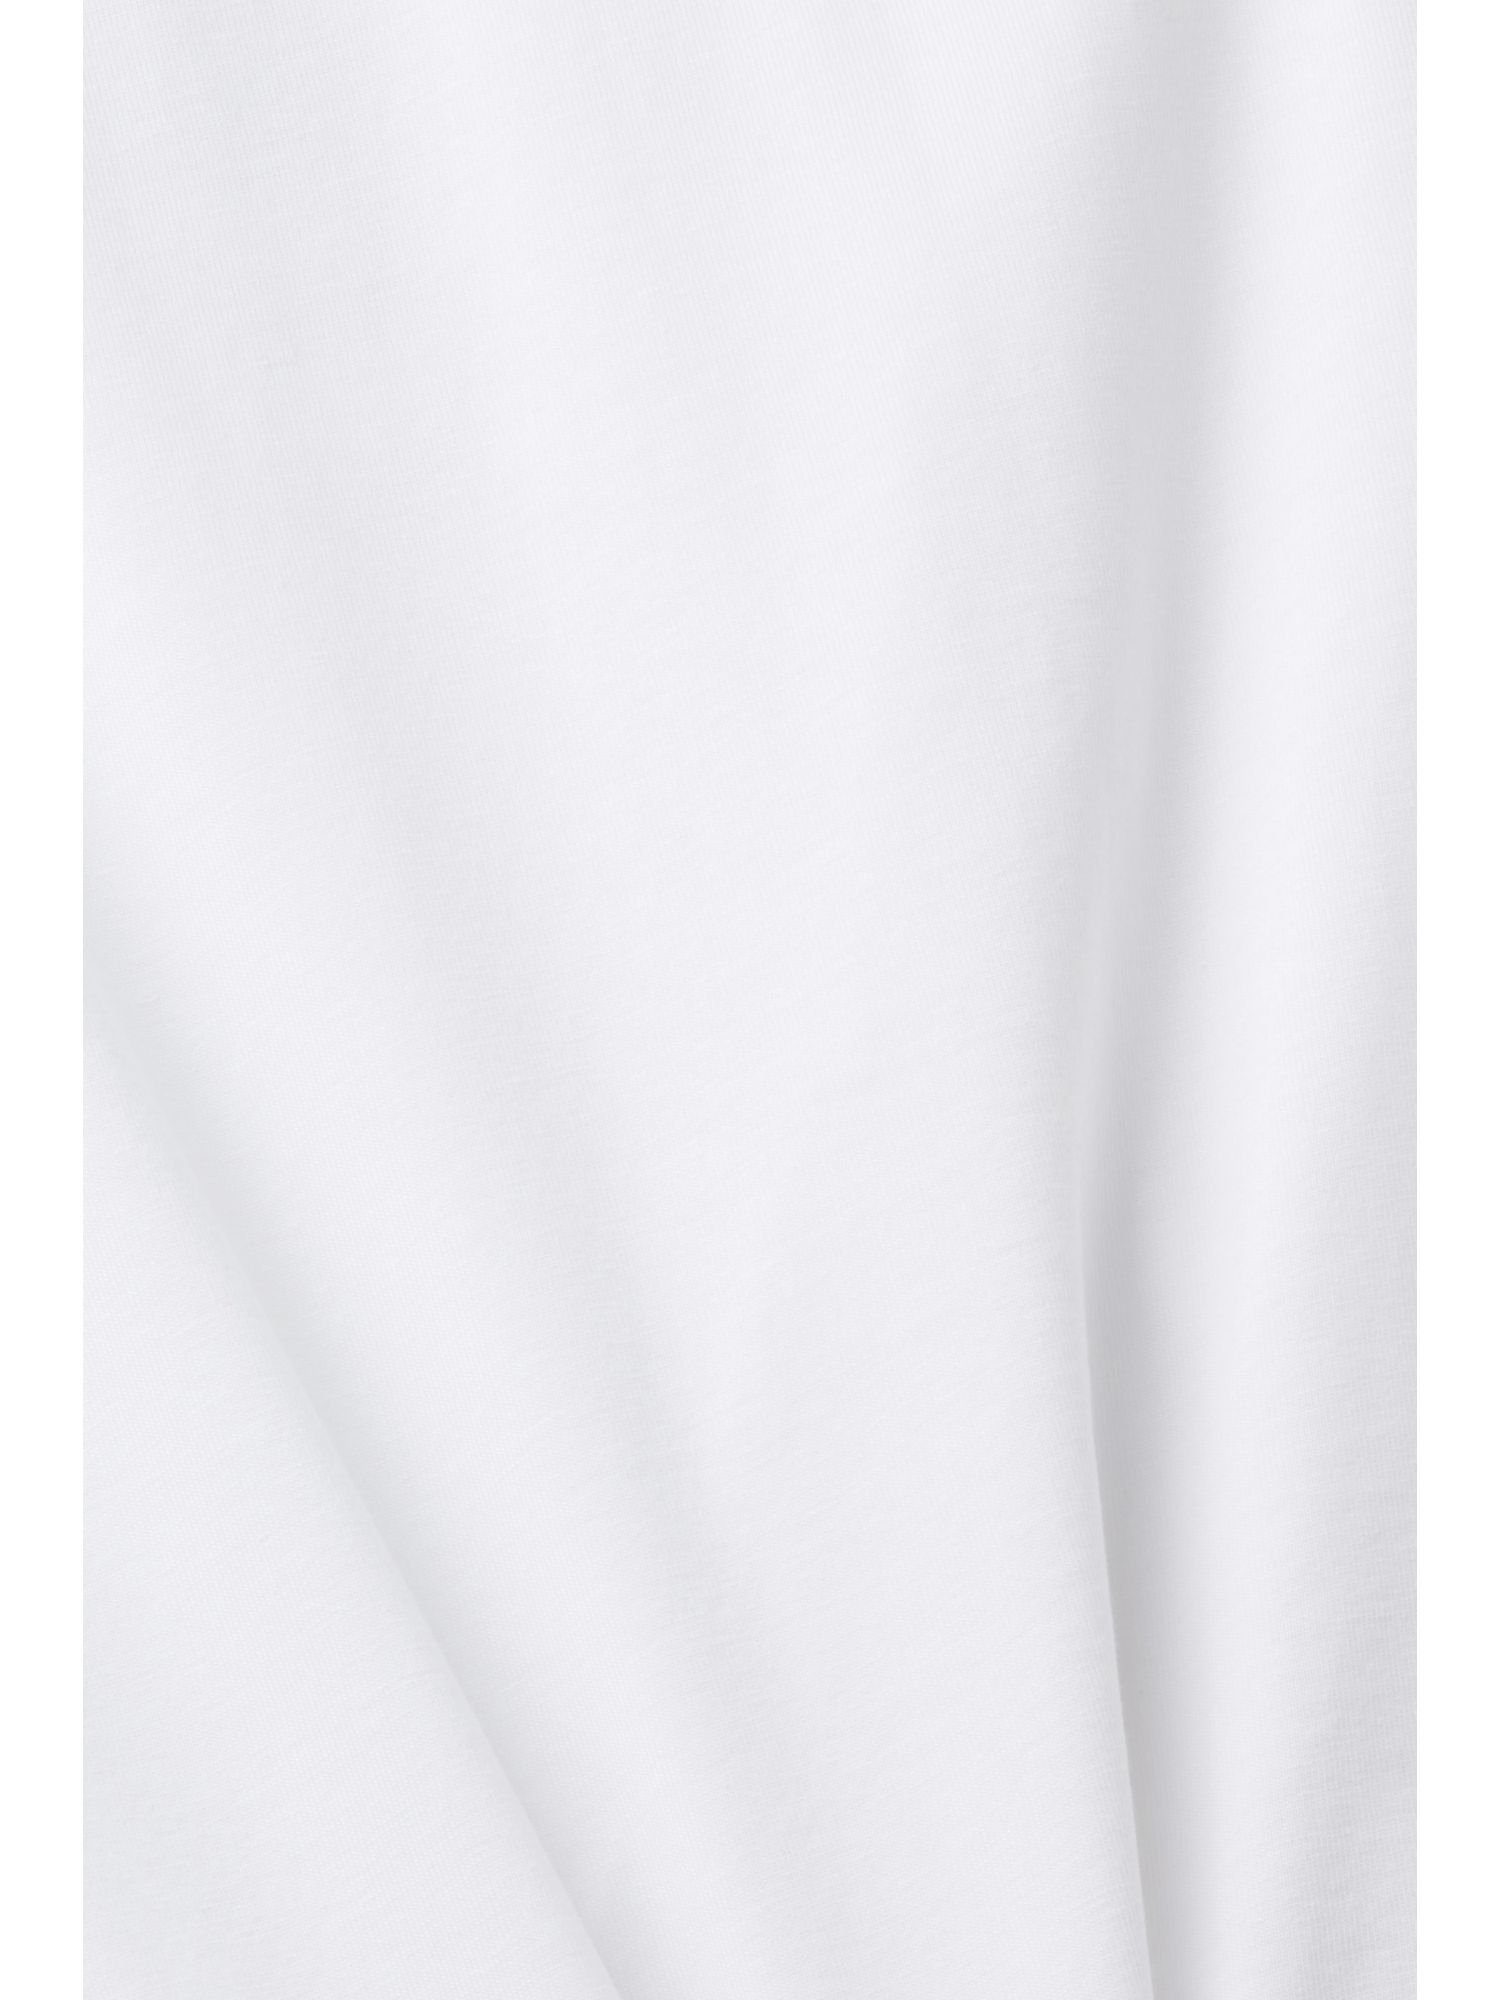 Esprit Collection T-Shirt Applikation WHITE mit NEW Jersey-T-Shirt (1-tlg)